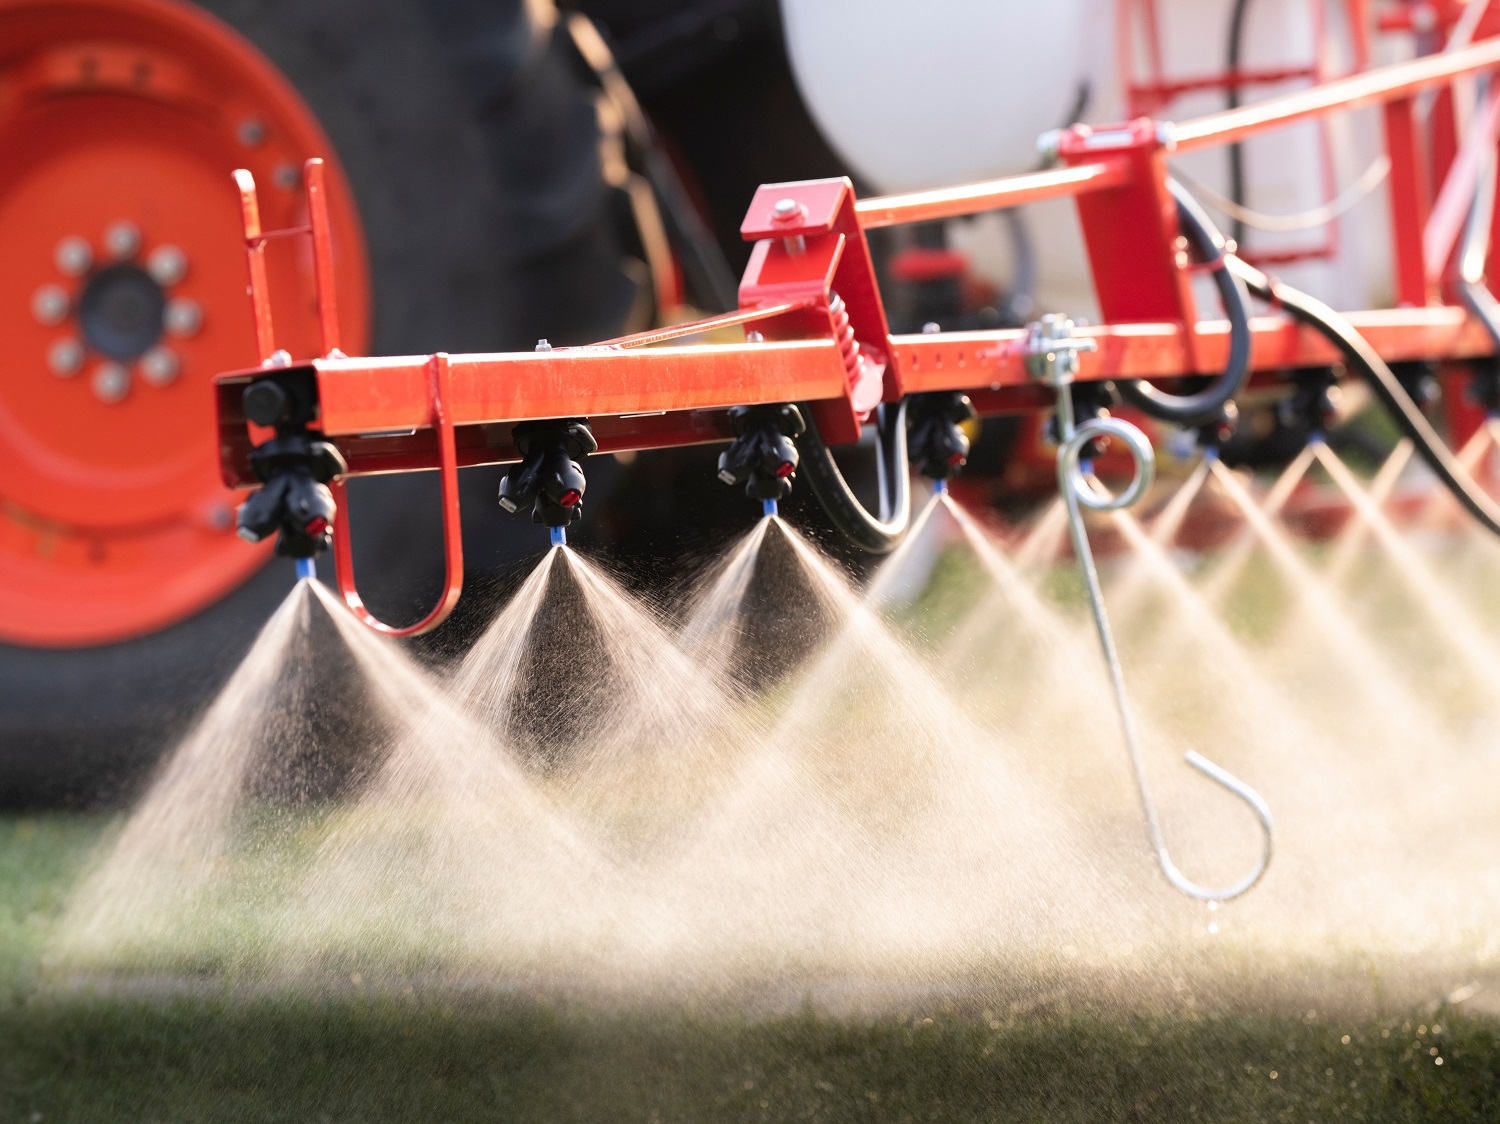 Scientists call on the UK and EU to record all pesticide applications.